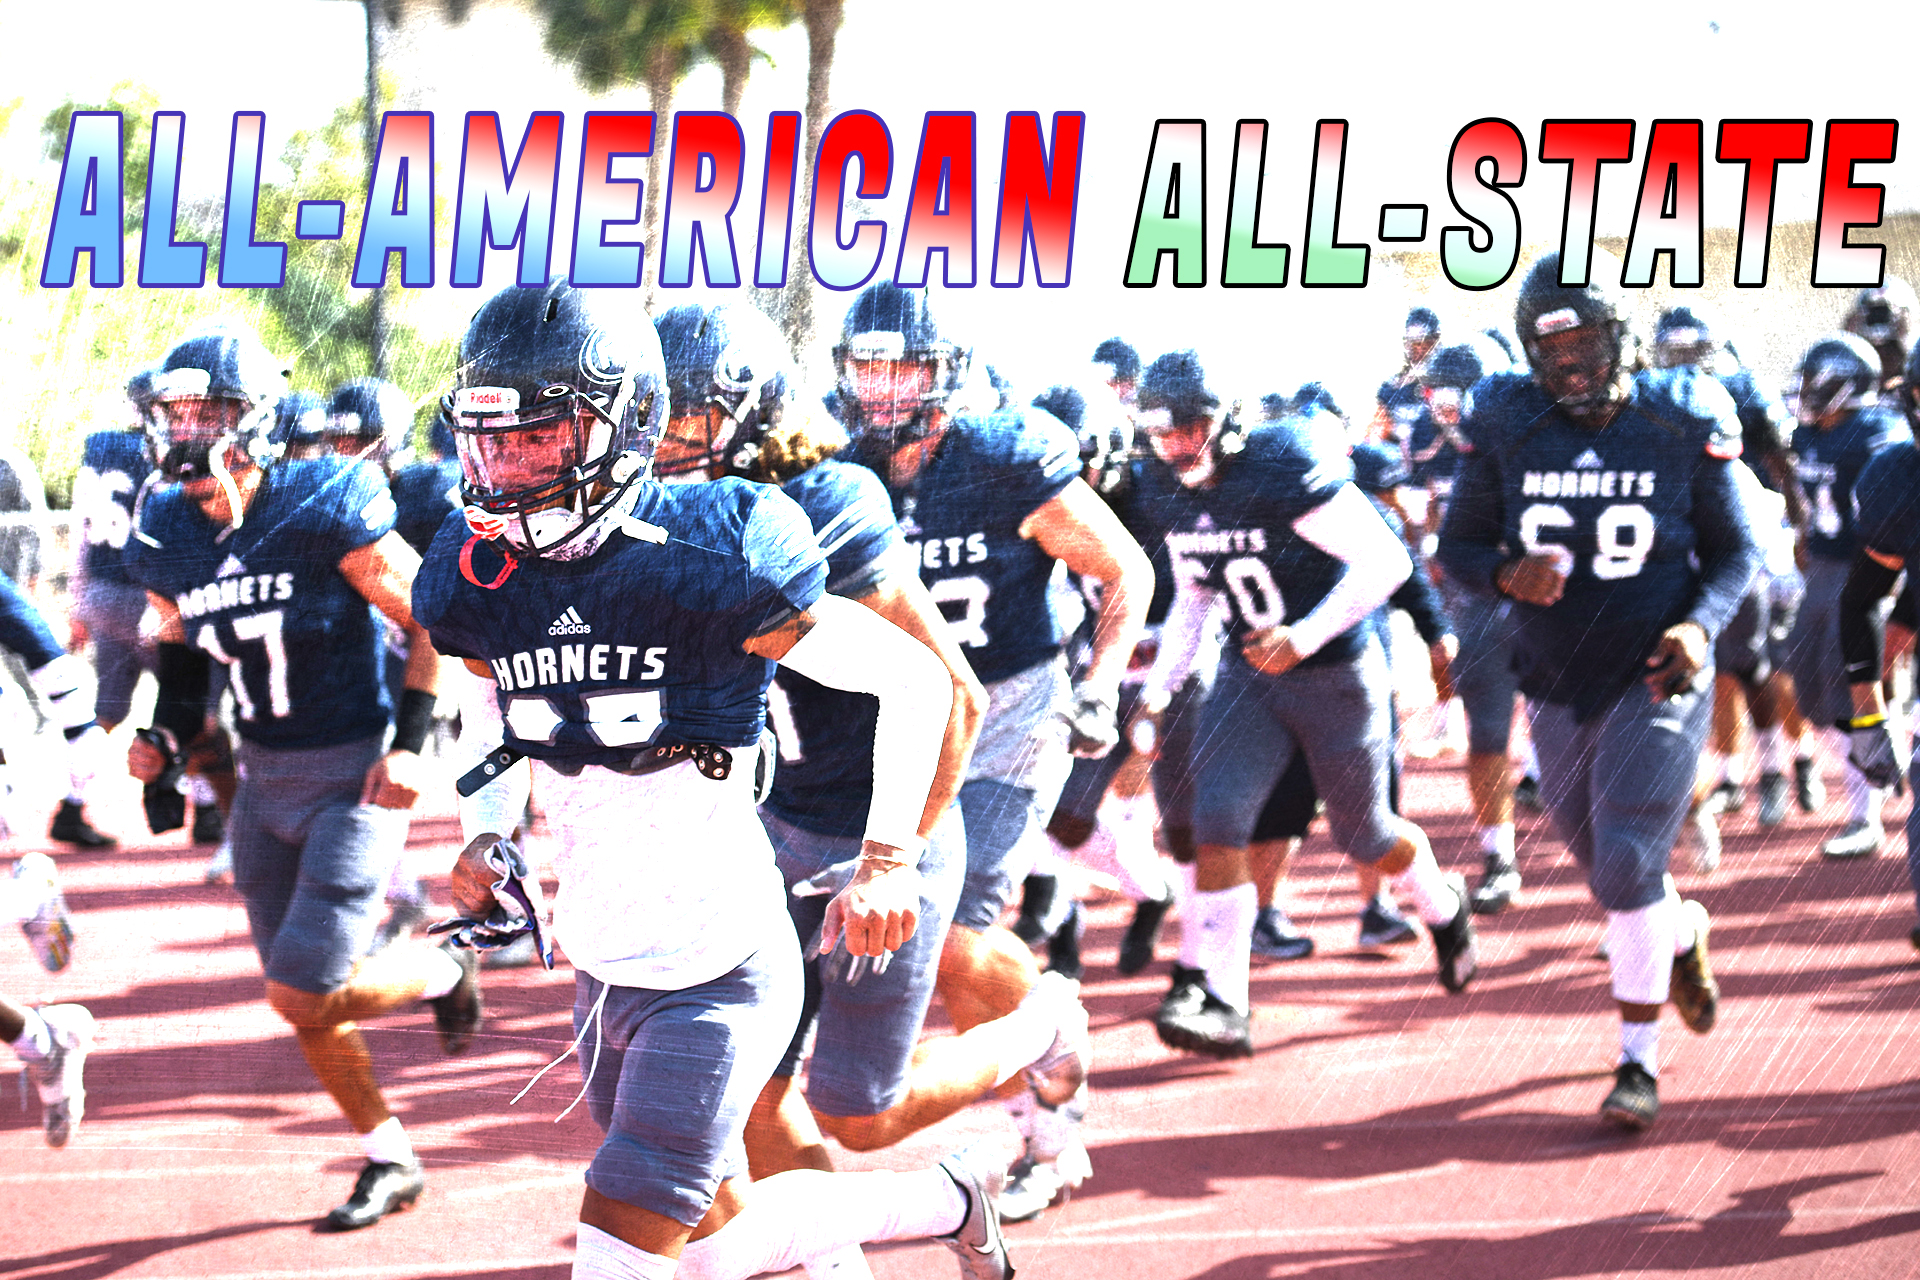 ALL AMERICAN AND ALL-STATE HORNETS